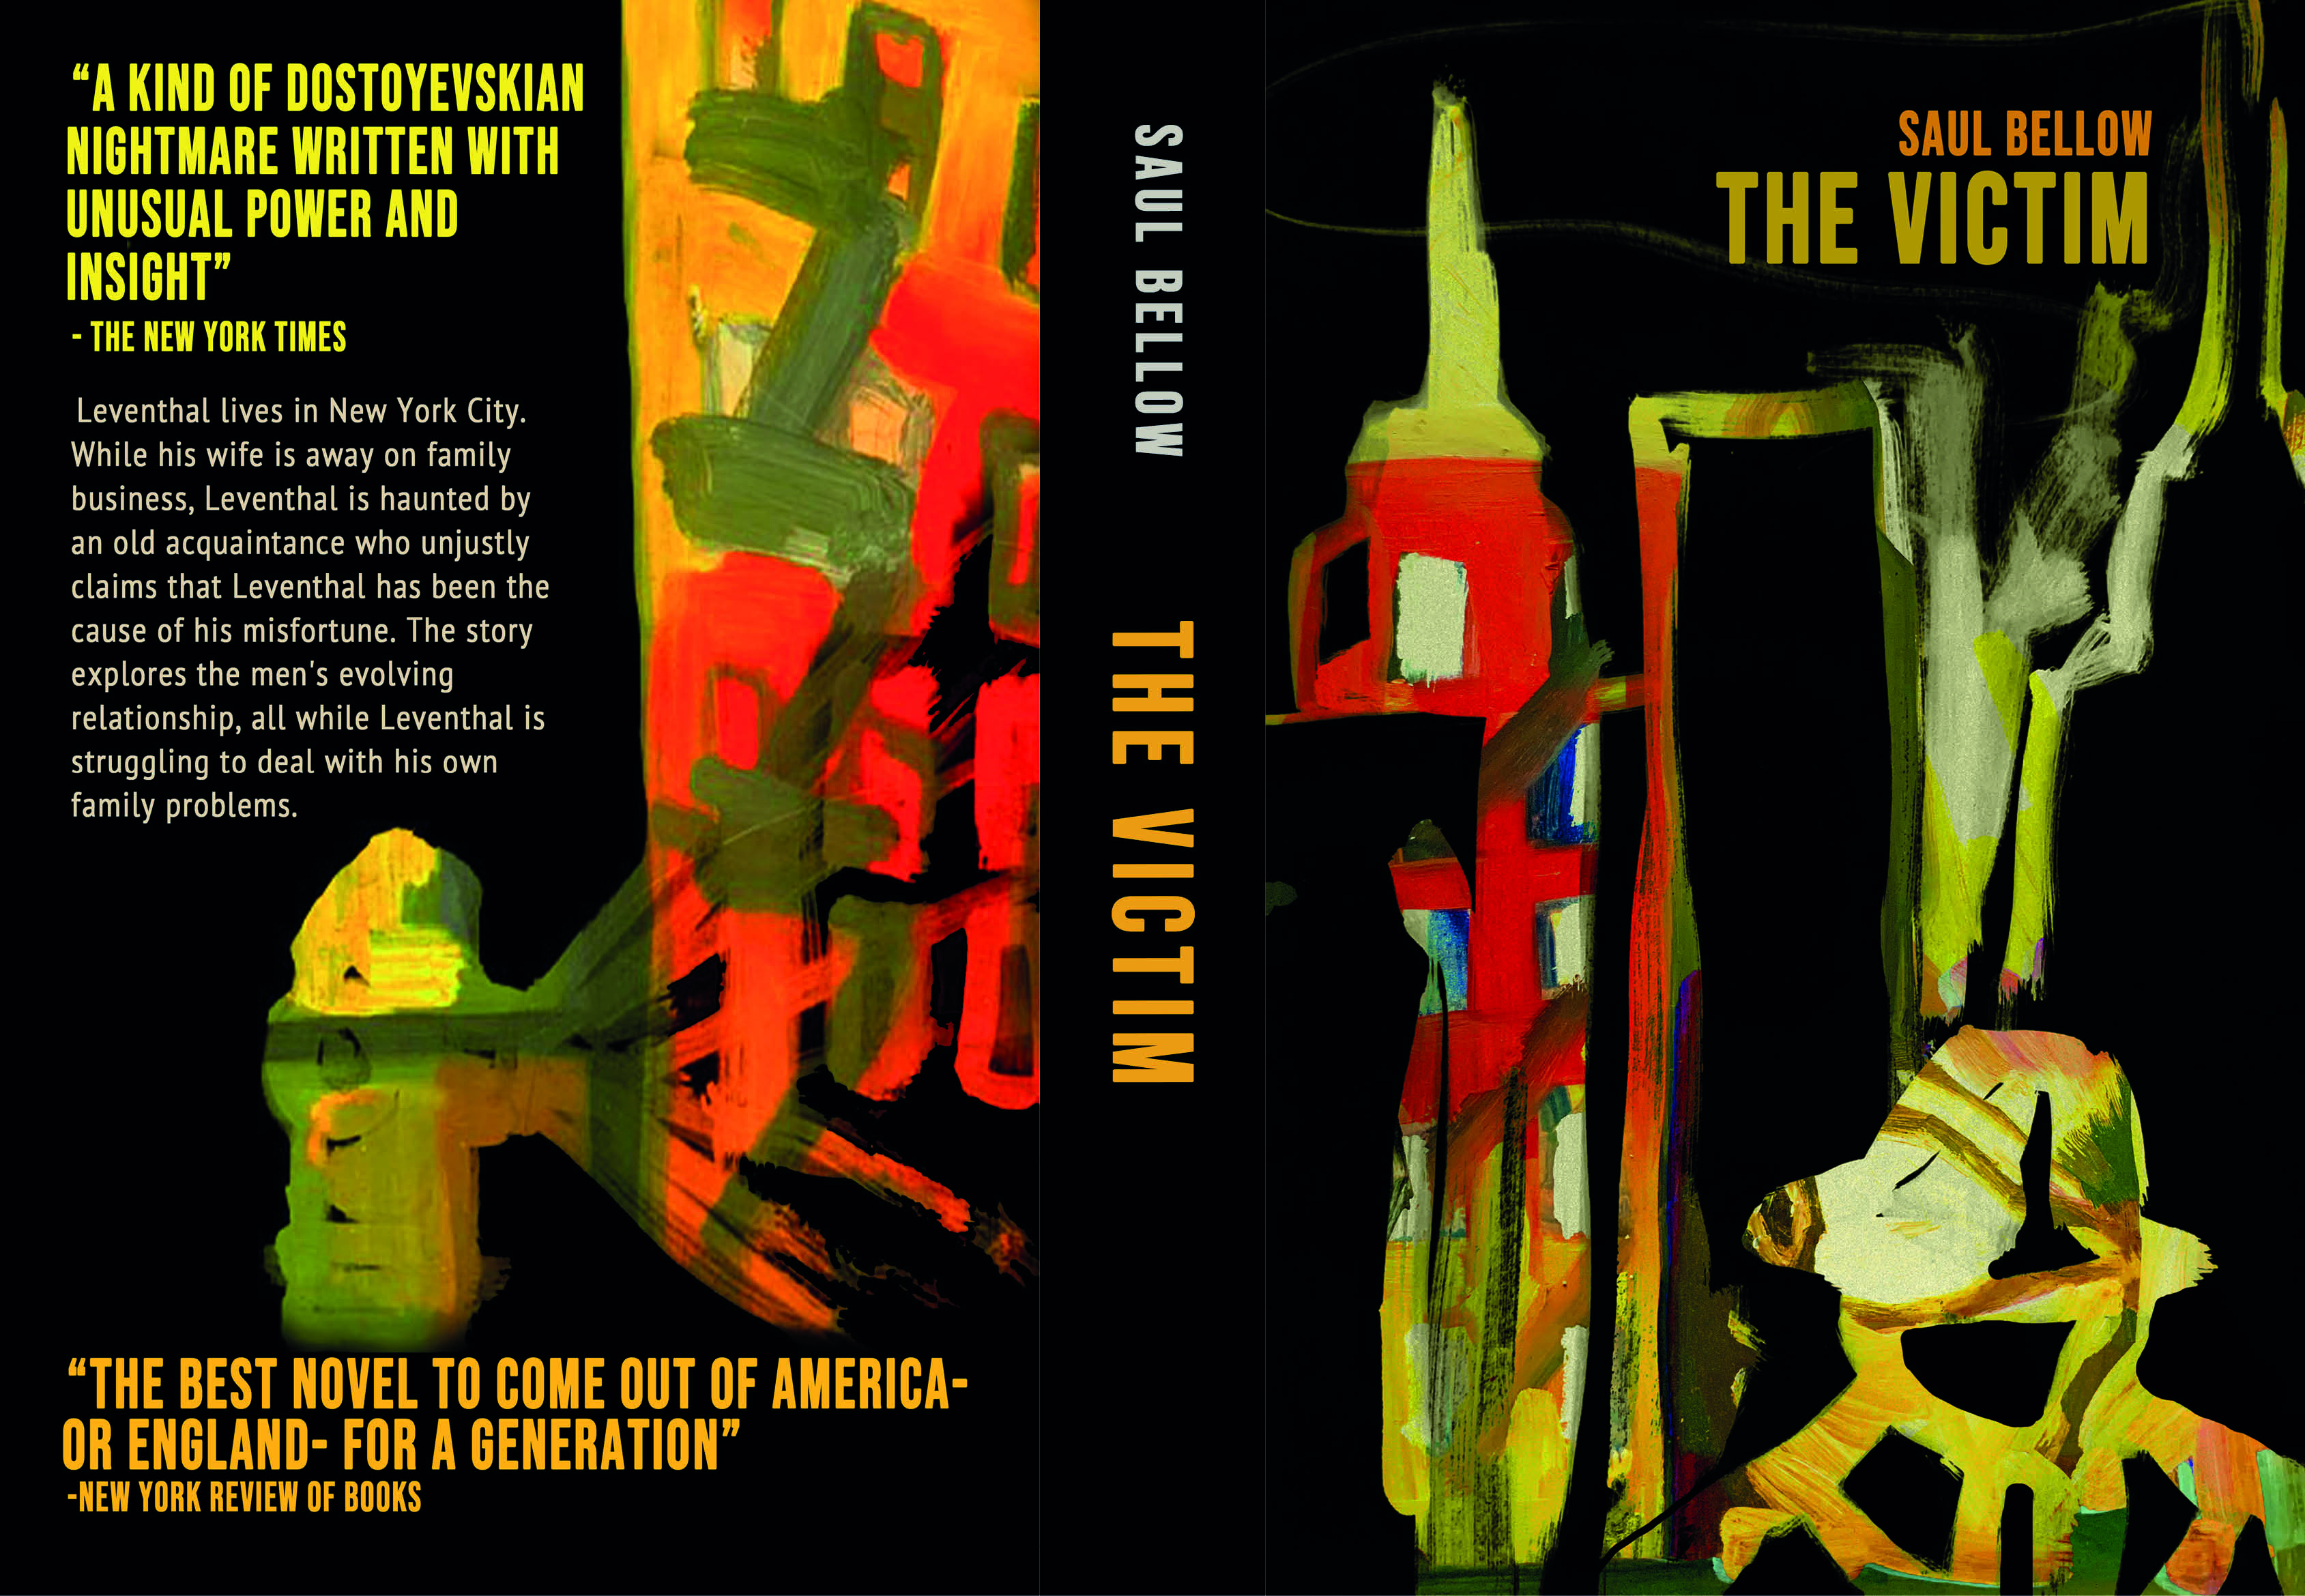 Abstract illustration using thick brushstrokes alongside black negative space, for a book cover of the classic novel by Saul Bellow, exploring Jewish identity through literature, by Naomi Scott